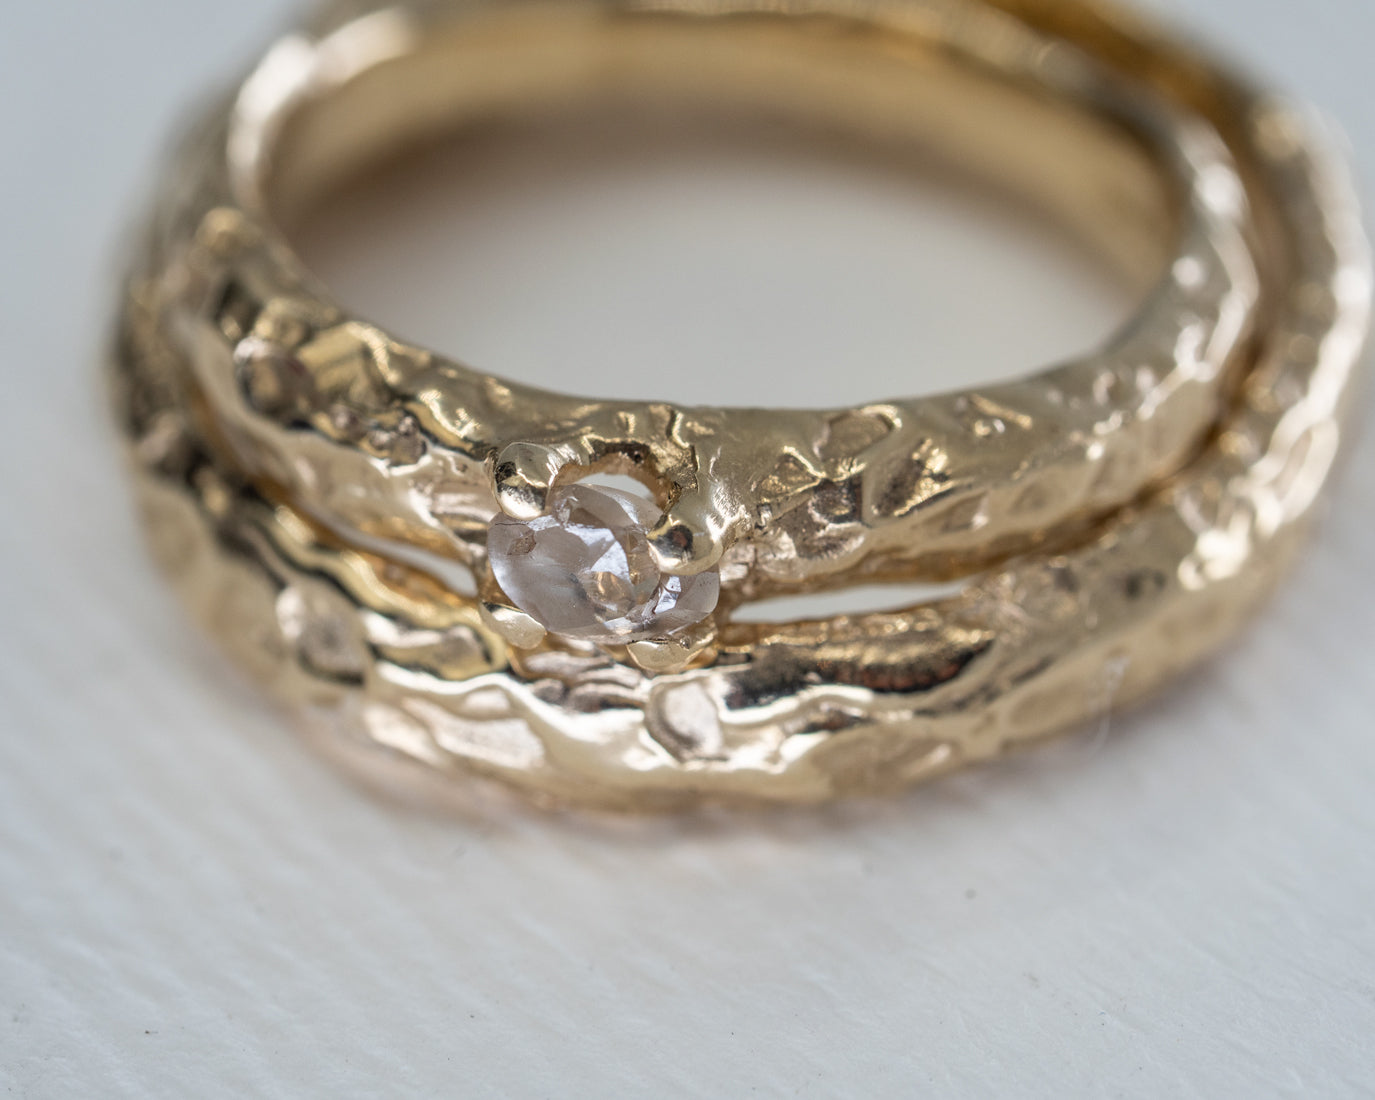 Organic shape of wedding bands with ethical ocean diamonds and recycled gold